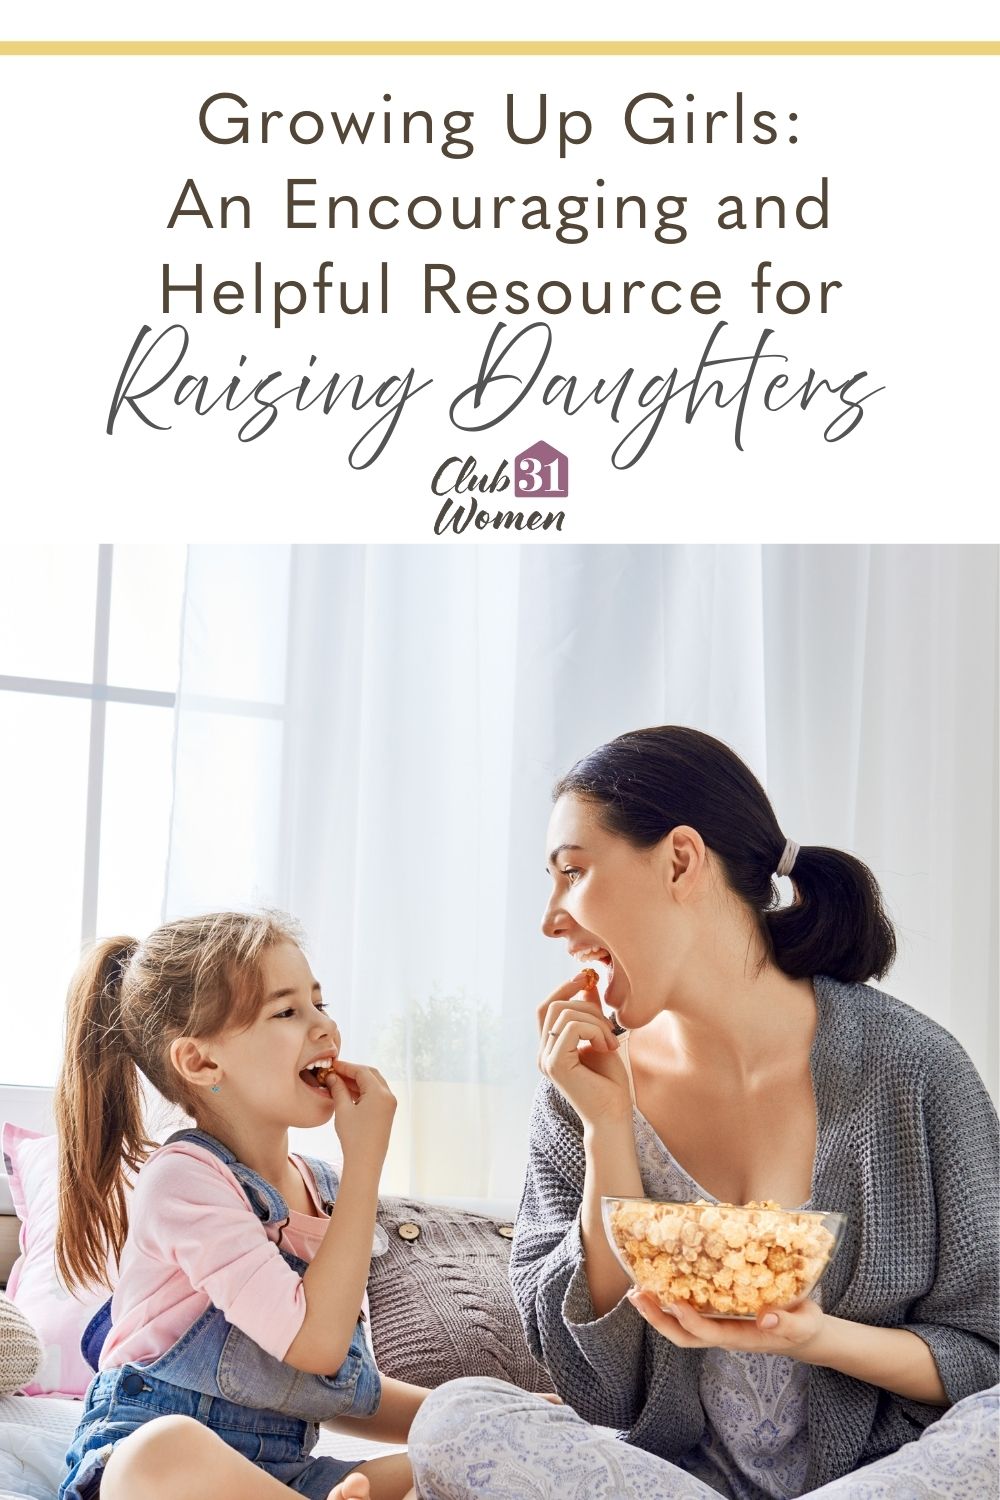 Got girls? Here's an encouraging and helpful resource for raising daughters! Shared from the heart of a mom with four girls herself. via @Club31Women